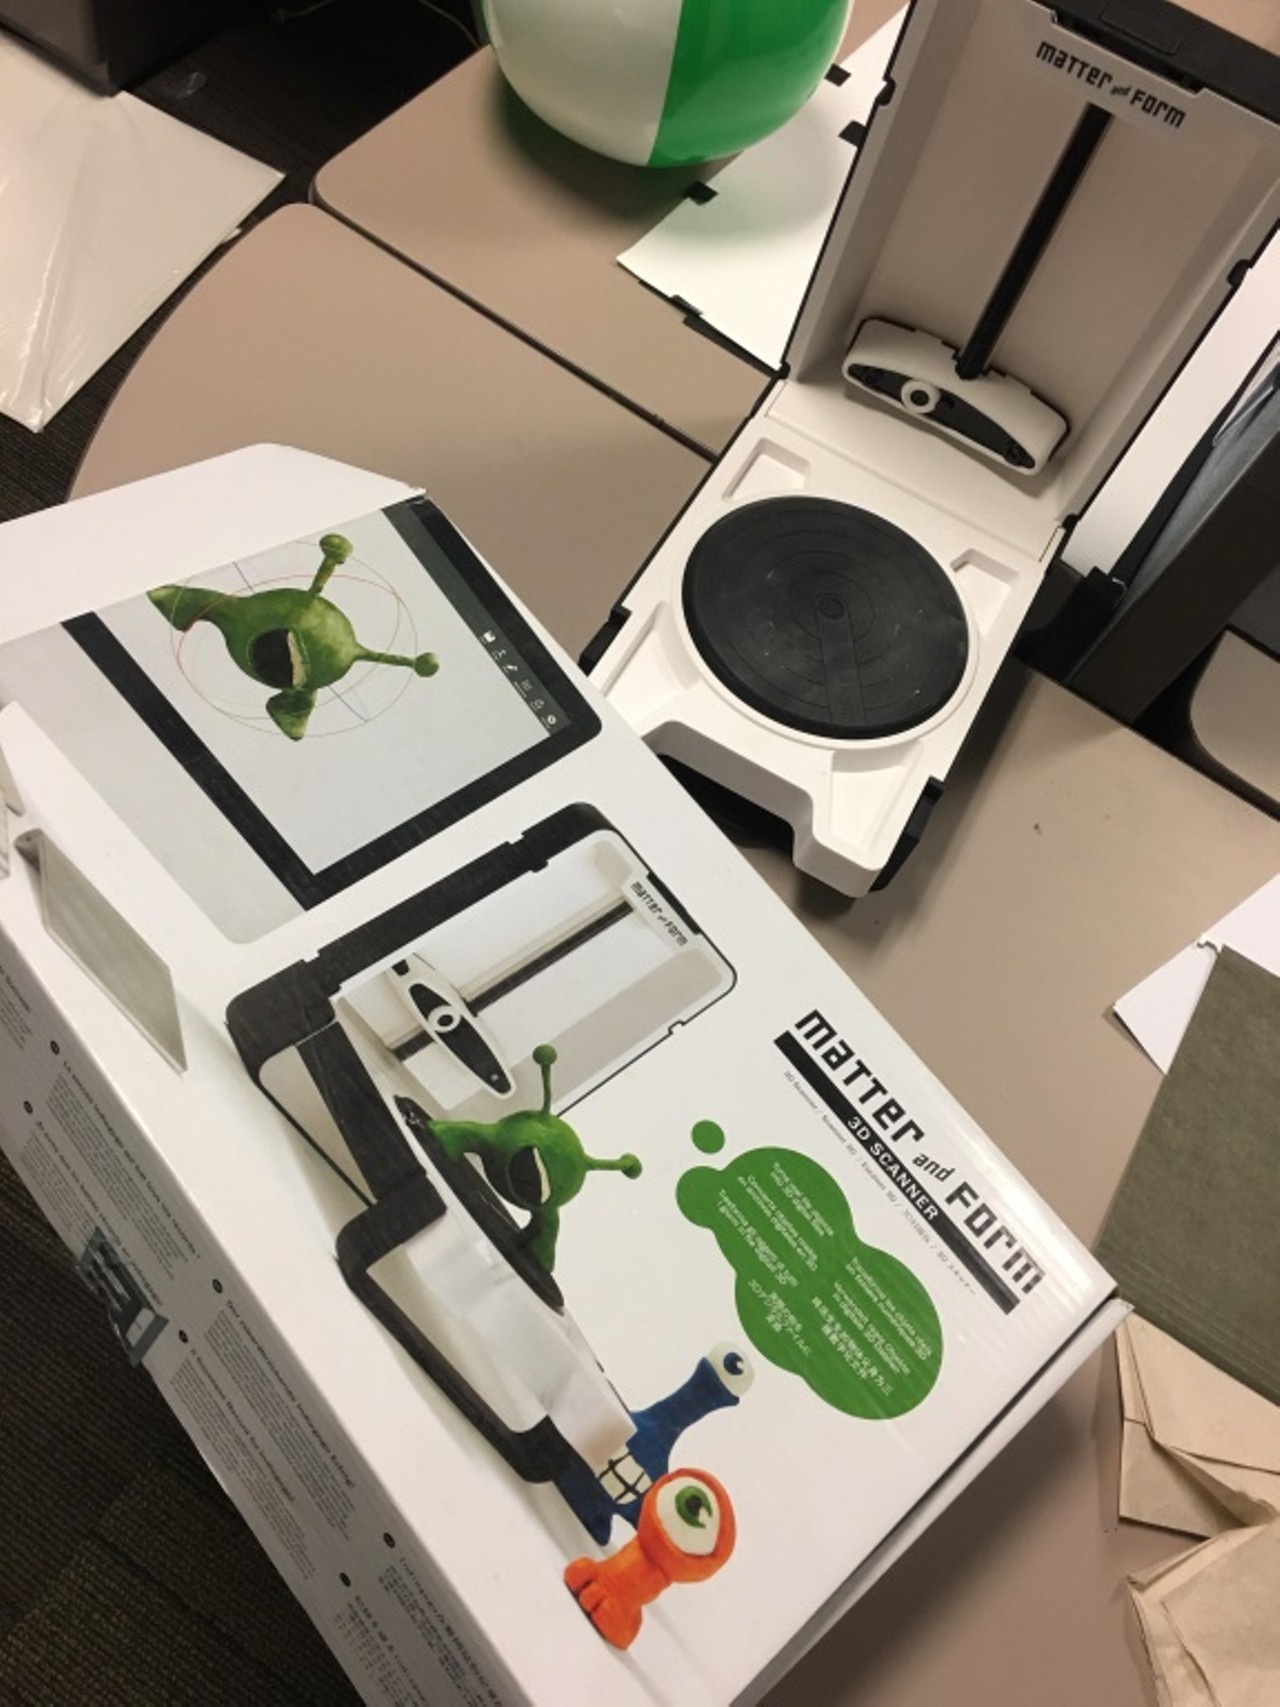 ECOT apparently was on the forefront of technology with 3D scanners, printers and printing thread. All of which, you can purchase at this auction.